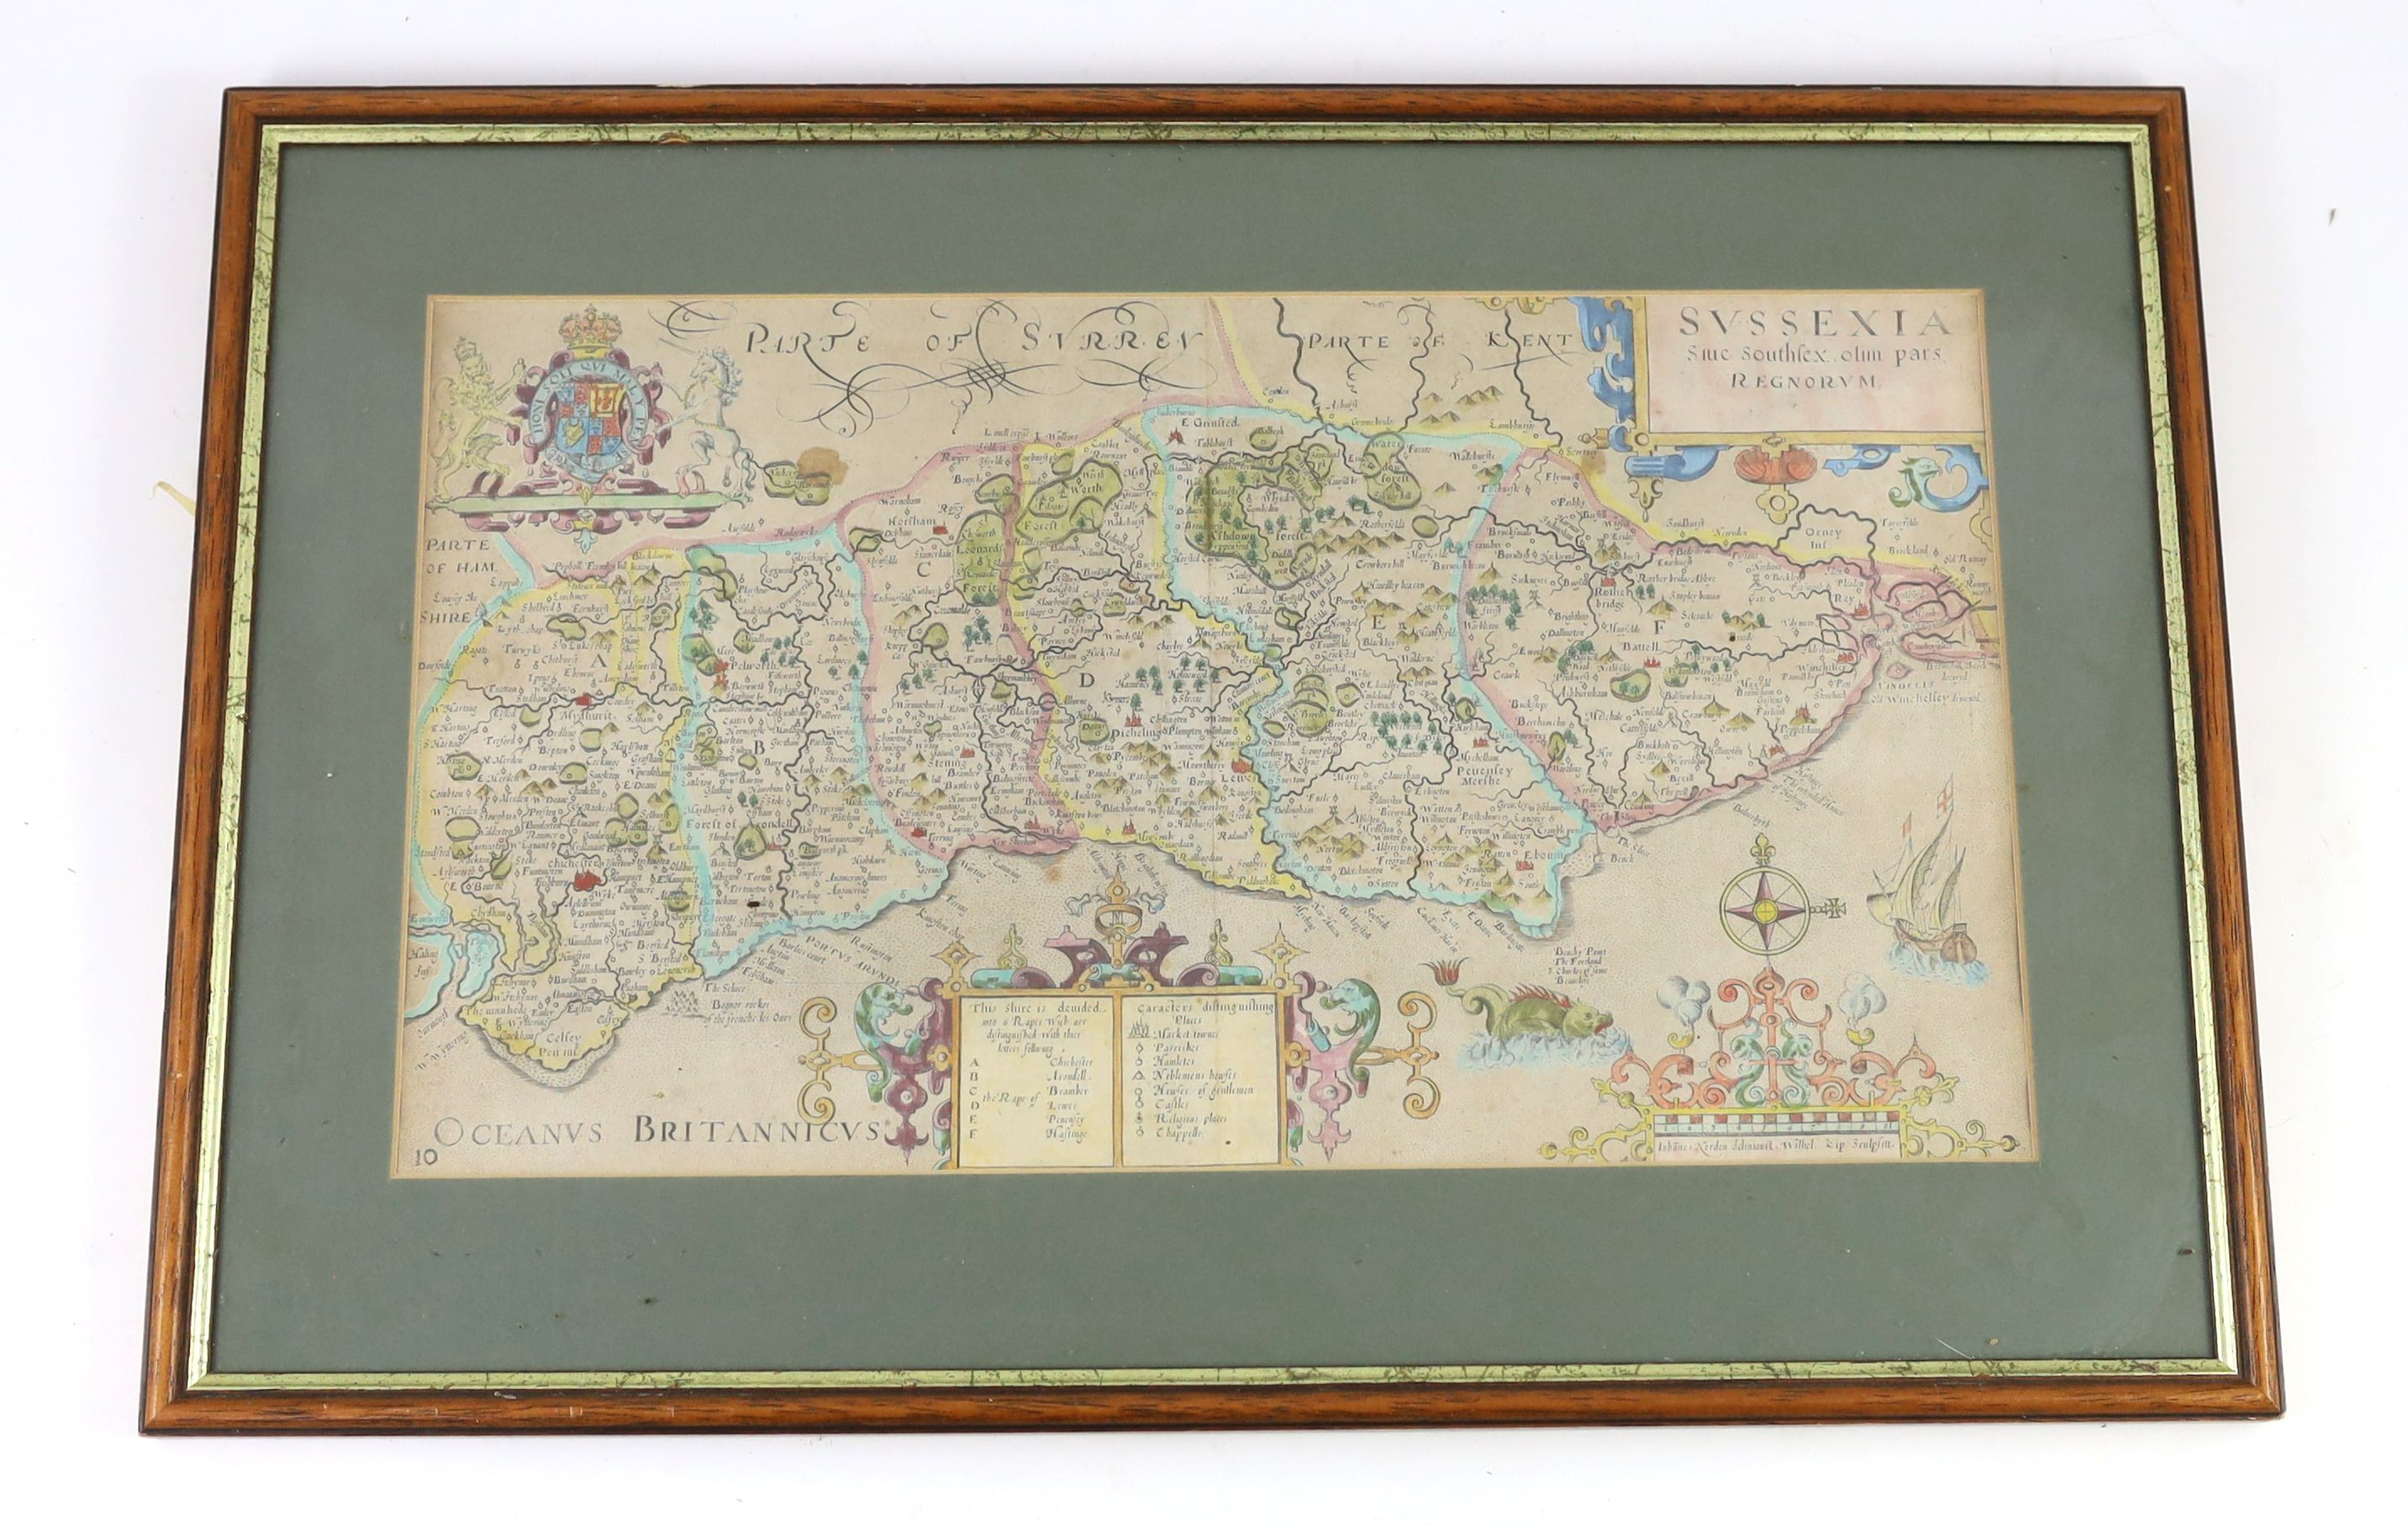 Norden, John. - Sussexia, engraved hand-coloured map of Sussex, framed and glazed, [1637], (image 22 x 39cms.) [Seale?] A correct chart of the German Ocean [i.e. North Sea]... for Mr Tindal’s continuation of Mr Rapin’s H